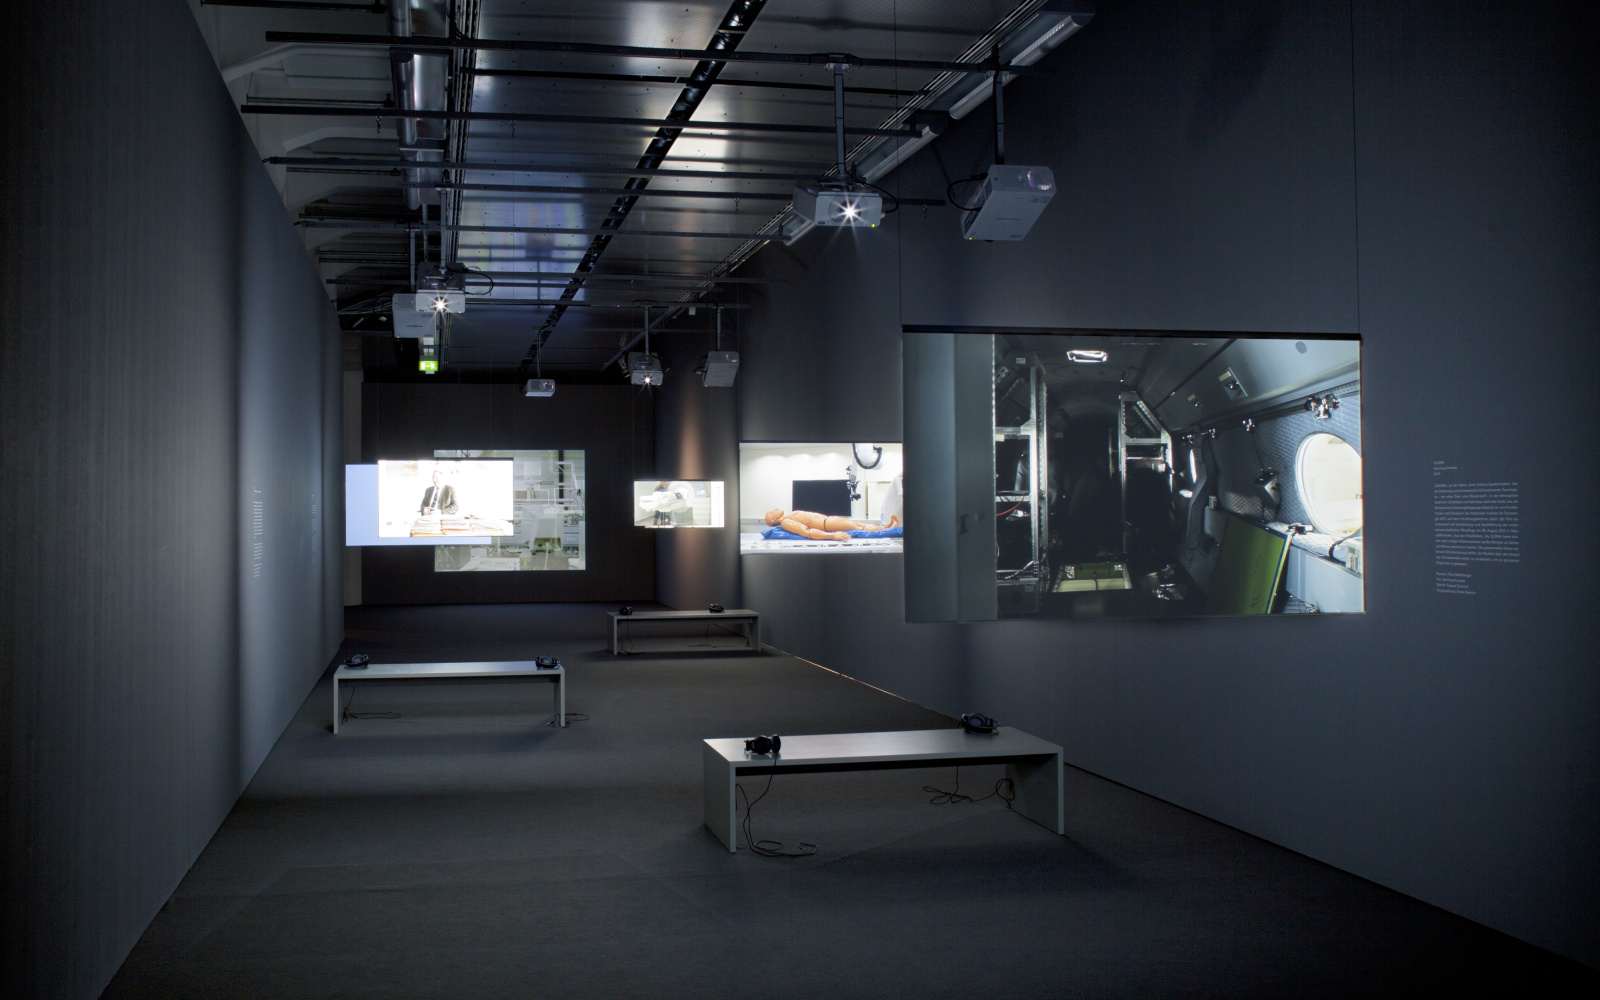  Exhibition view Maschinevision. Six projections on hanging screens of different sizes.